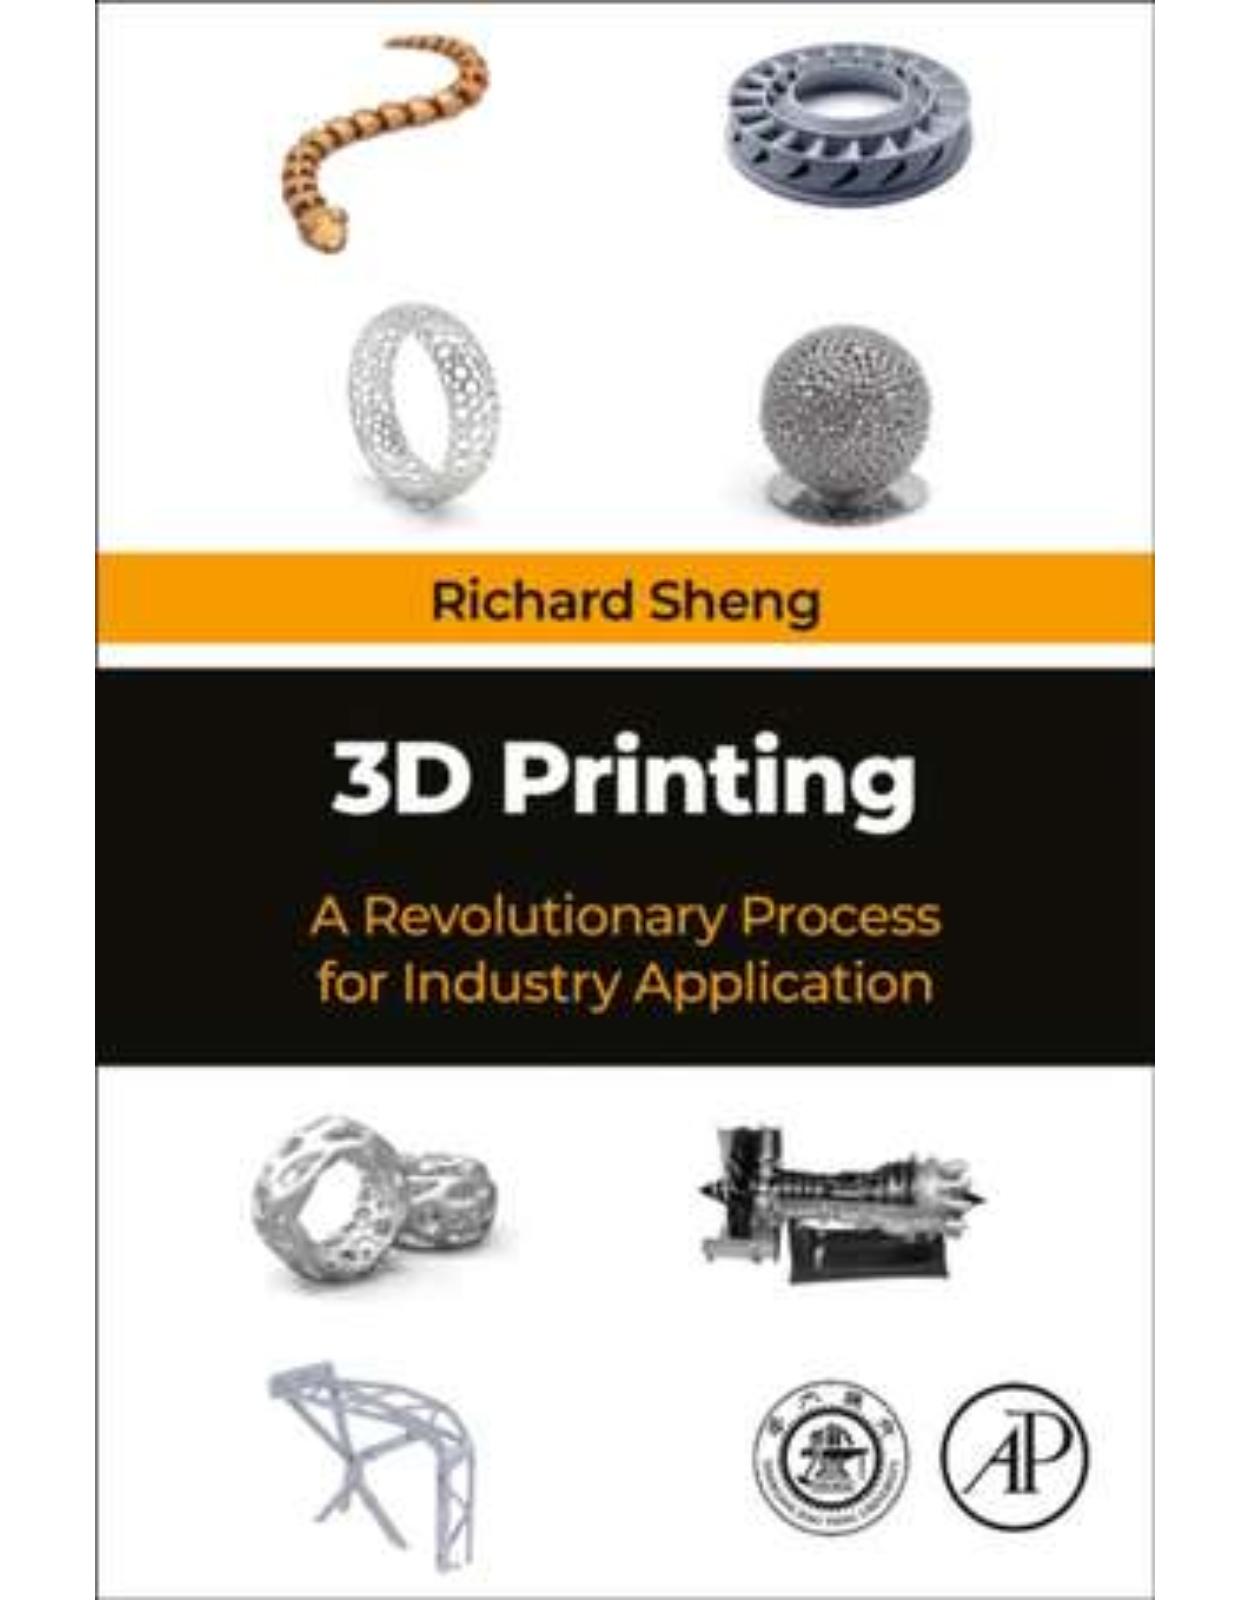 3D Printing: A Revolutionary Process for Industry Applications